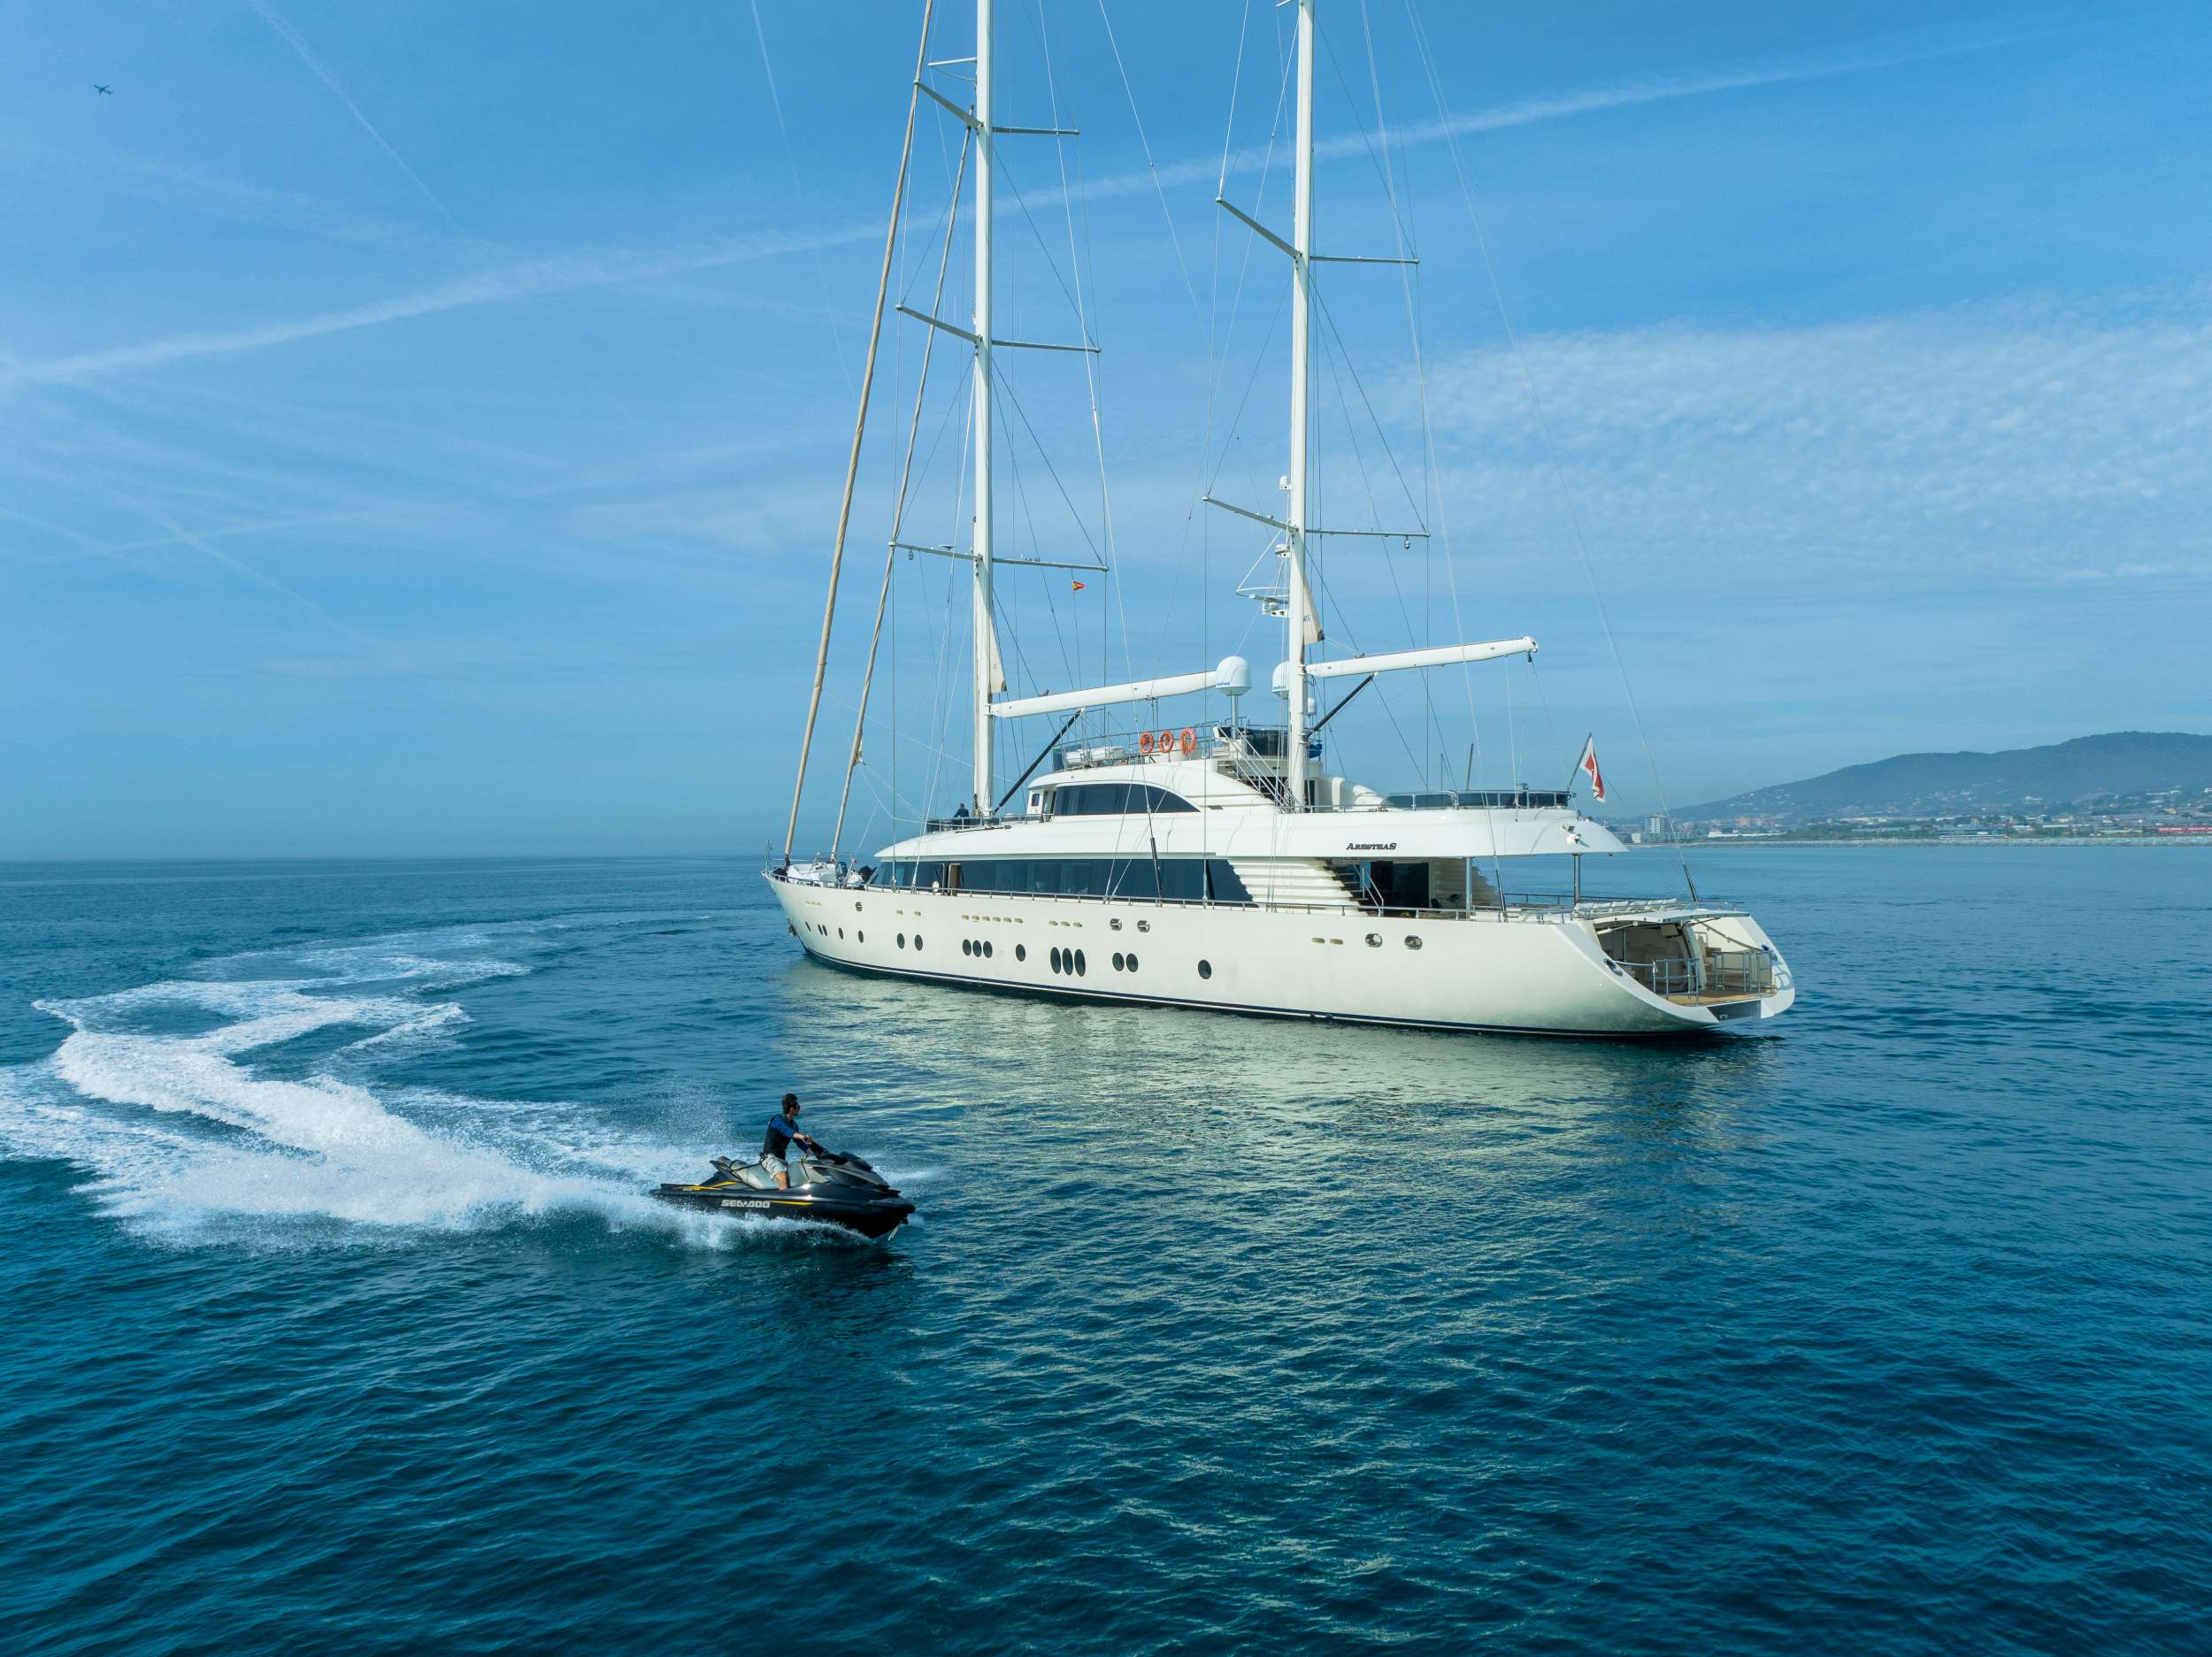 ARESTEAS - Yacht Charter Tenerife & Boat hire in W. Med -Naples/Sicily, W. Med -Riviera/Cors/Sard., W. Med - Spain/Balearics 1